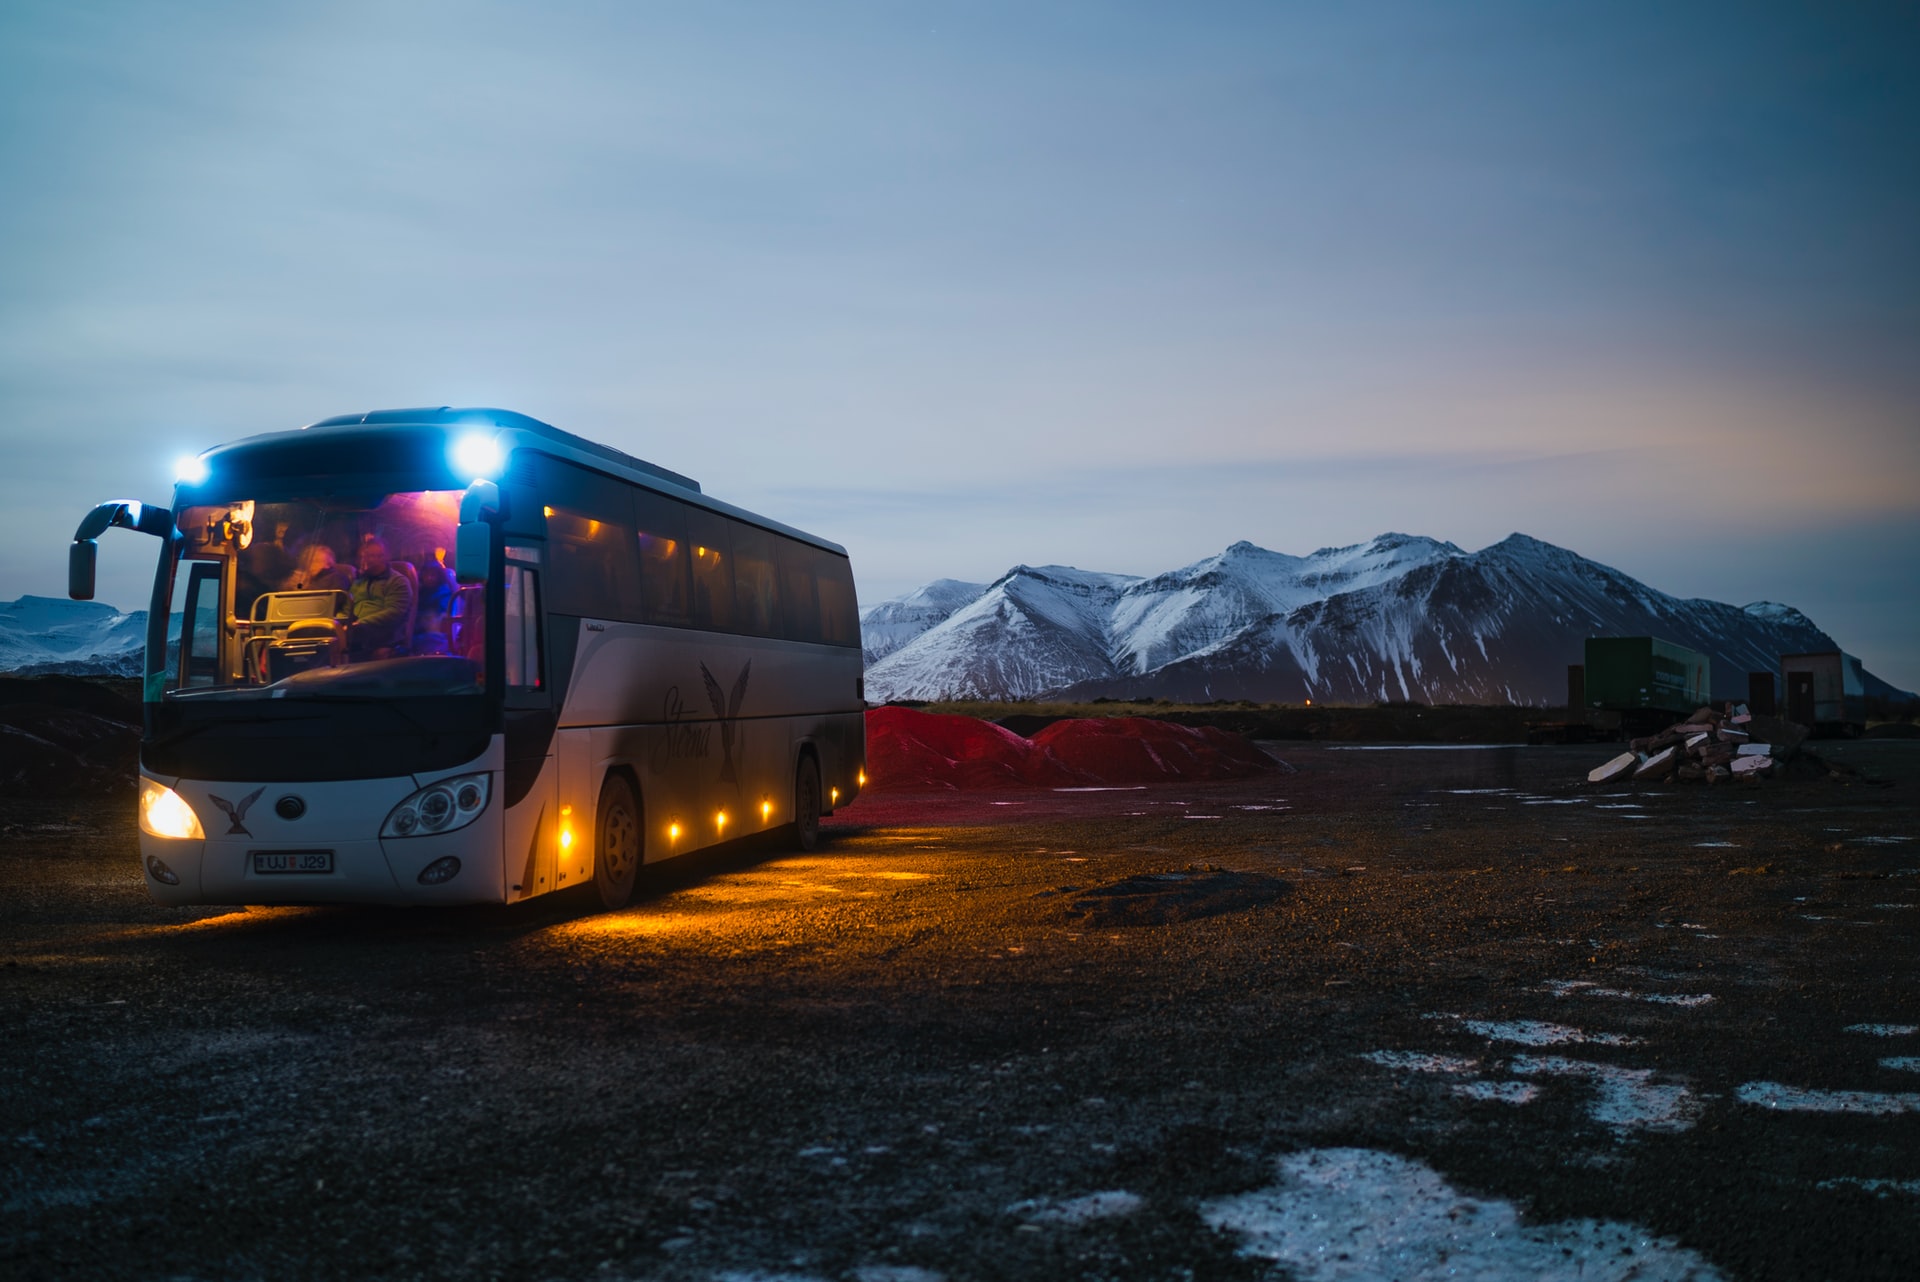 It's now possible to buy bus tickets online for Iceland and many other countries. (photo: Juan Encalada)